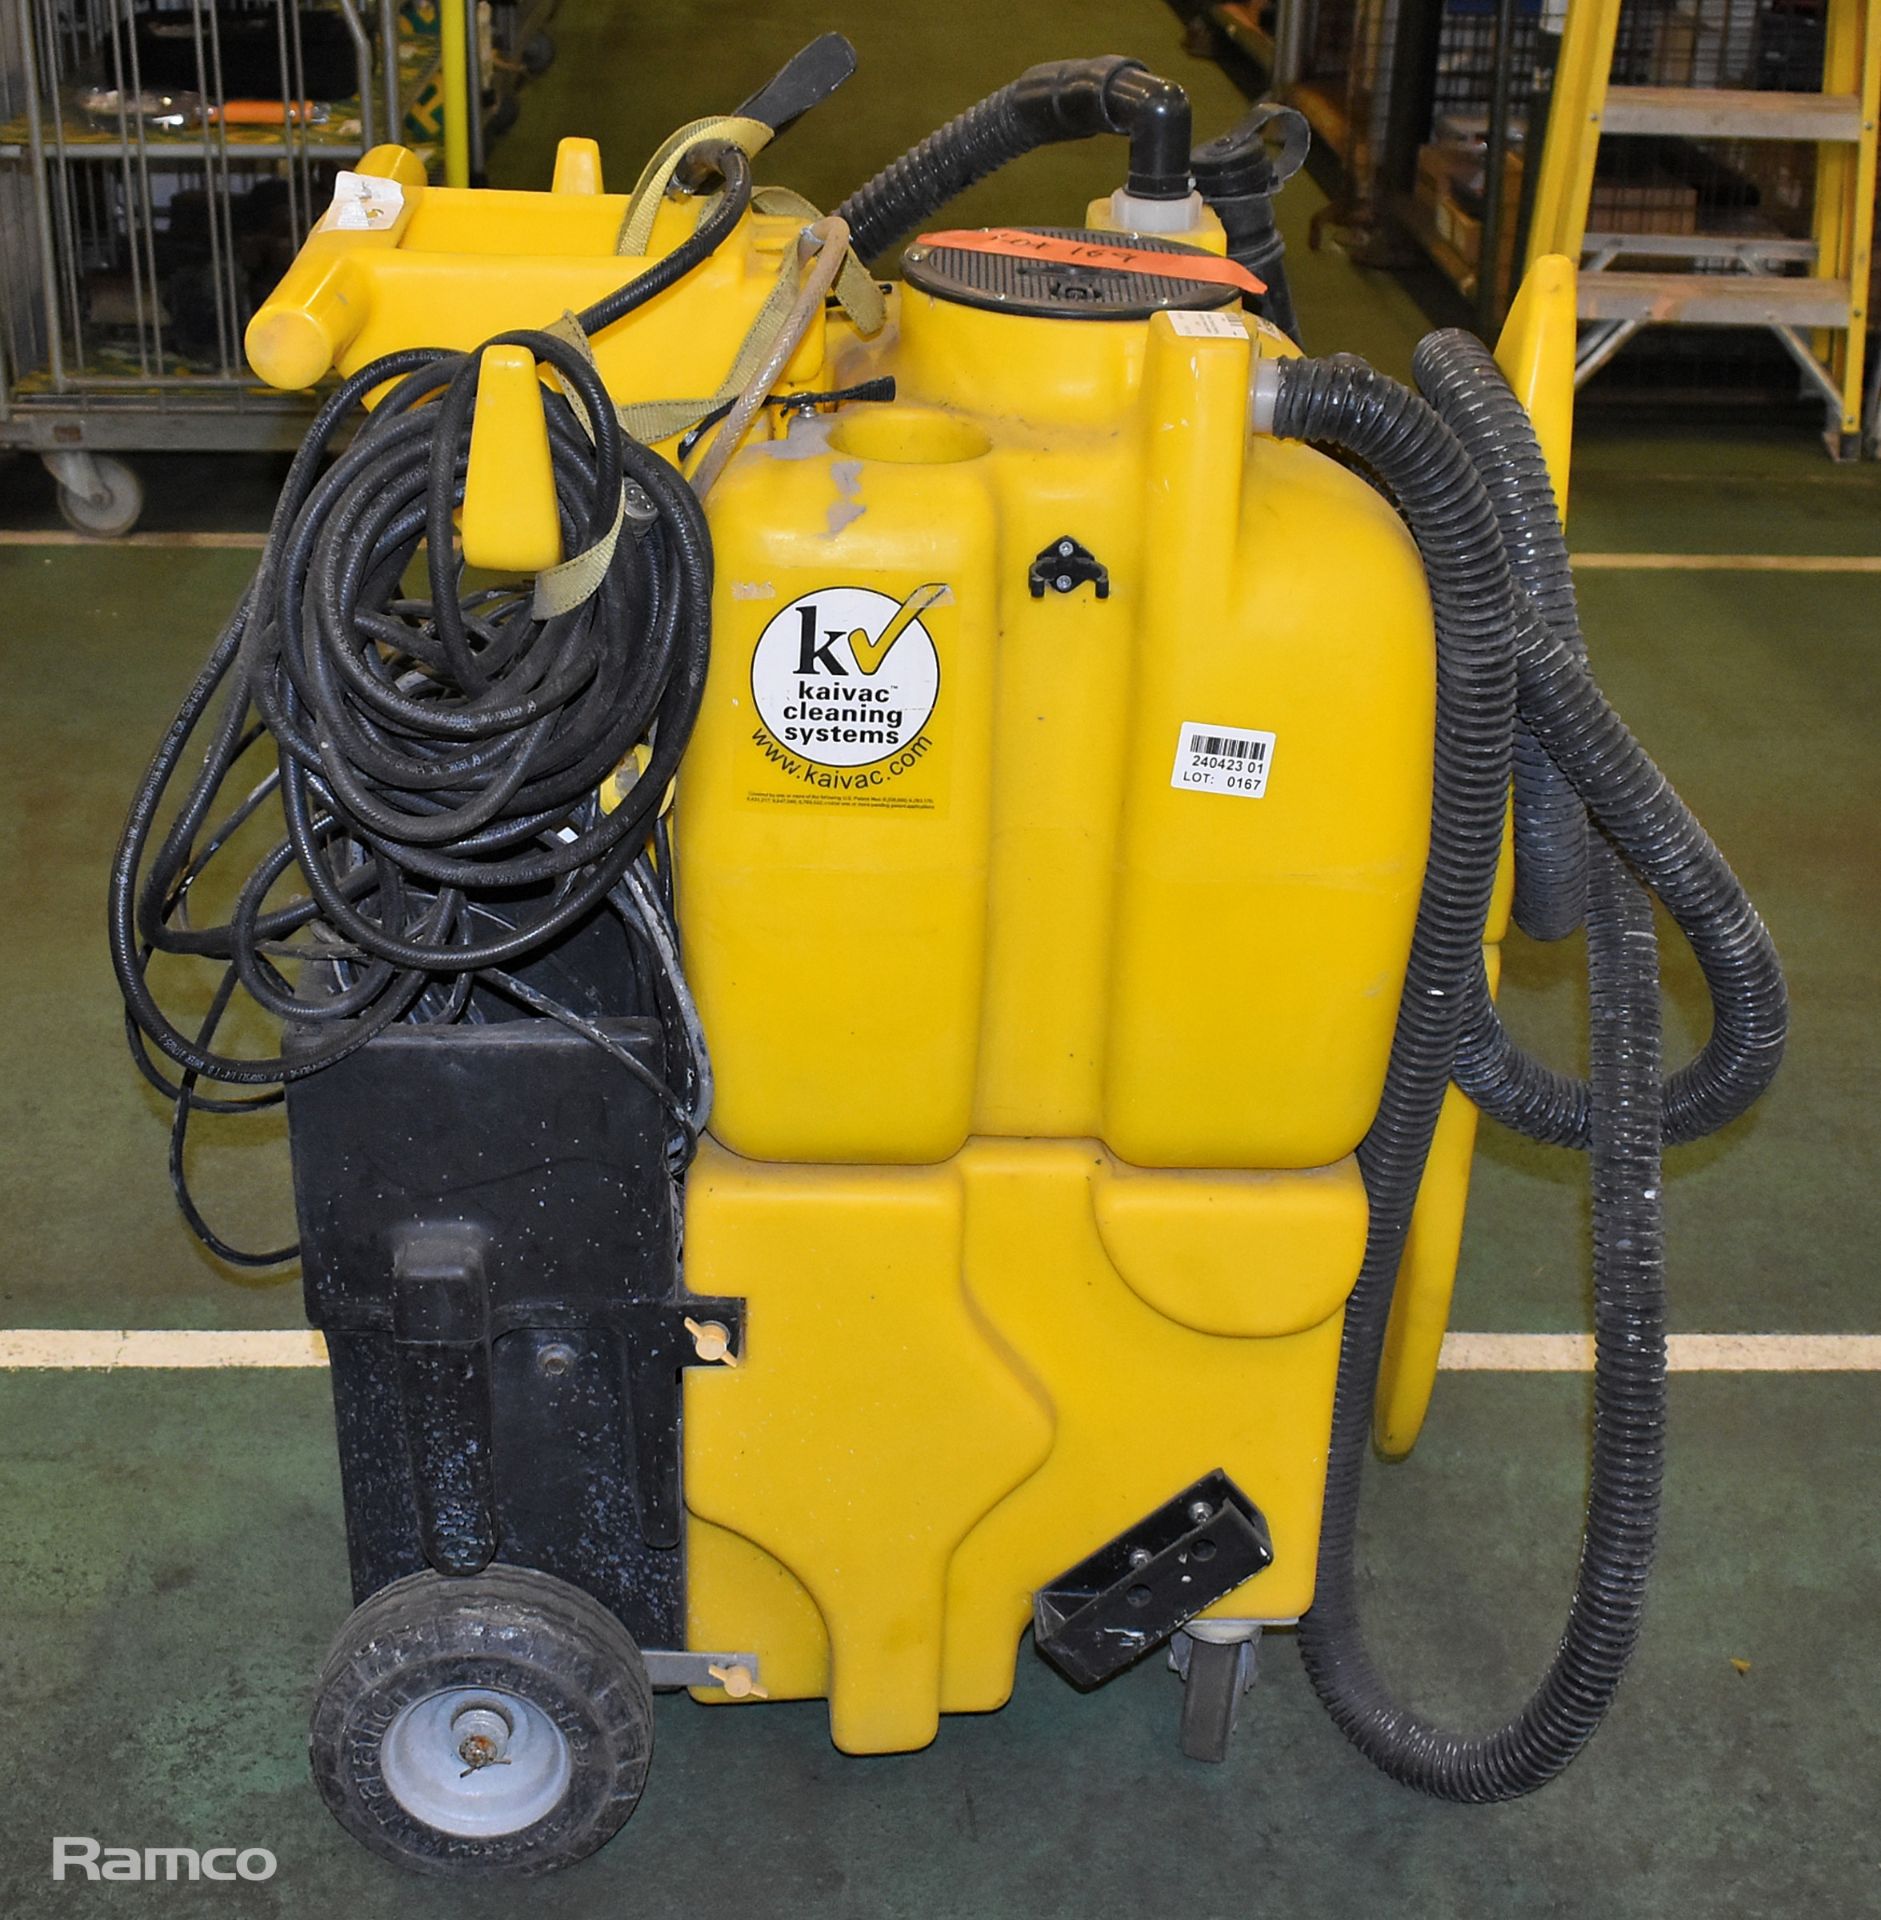 Kaivac Cleaning Systems industrial pressure washer - 240V